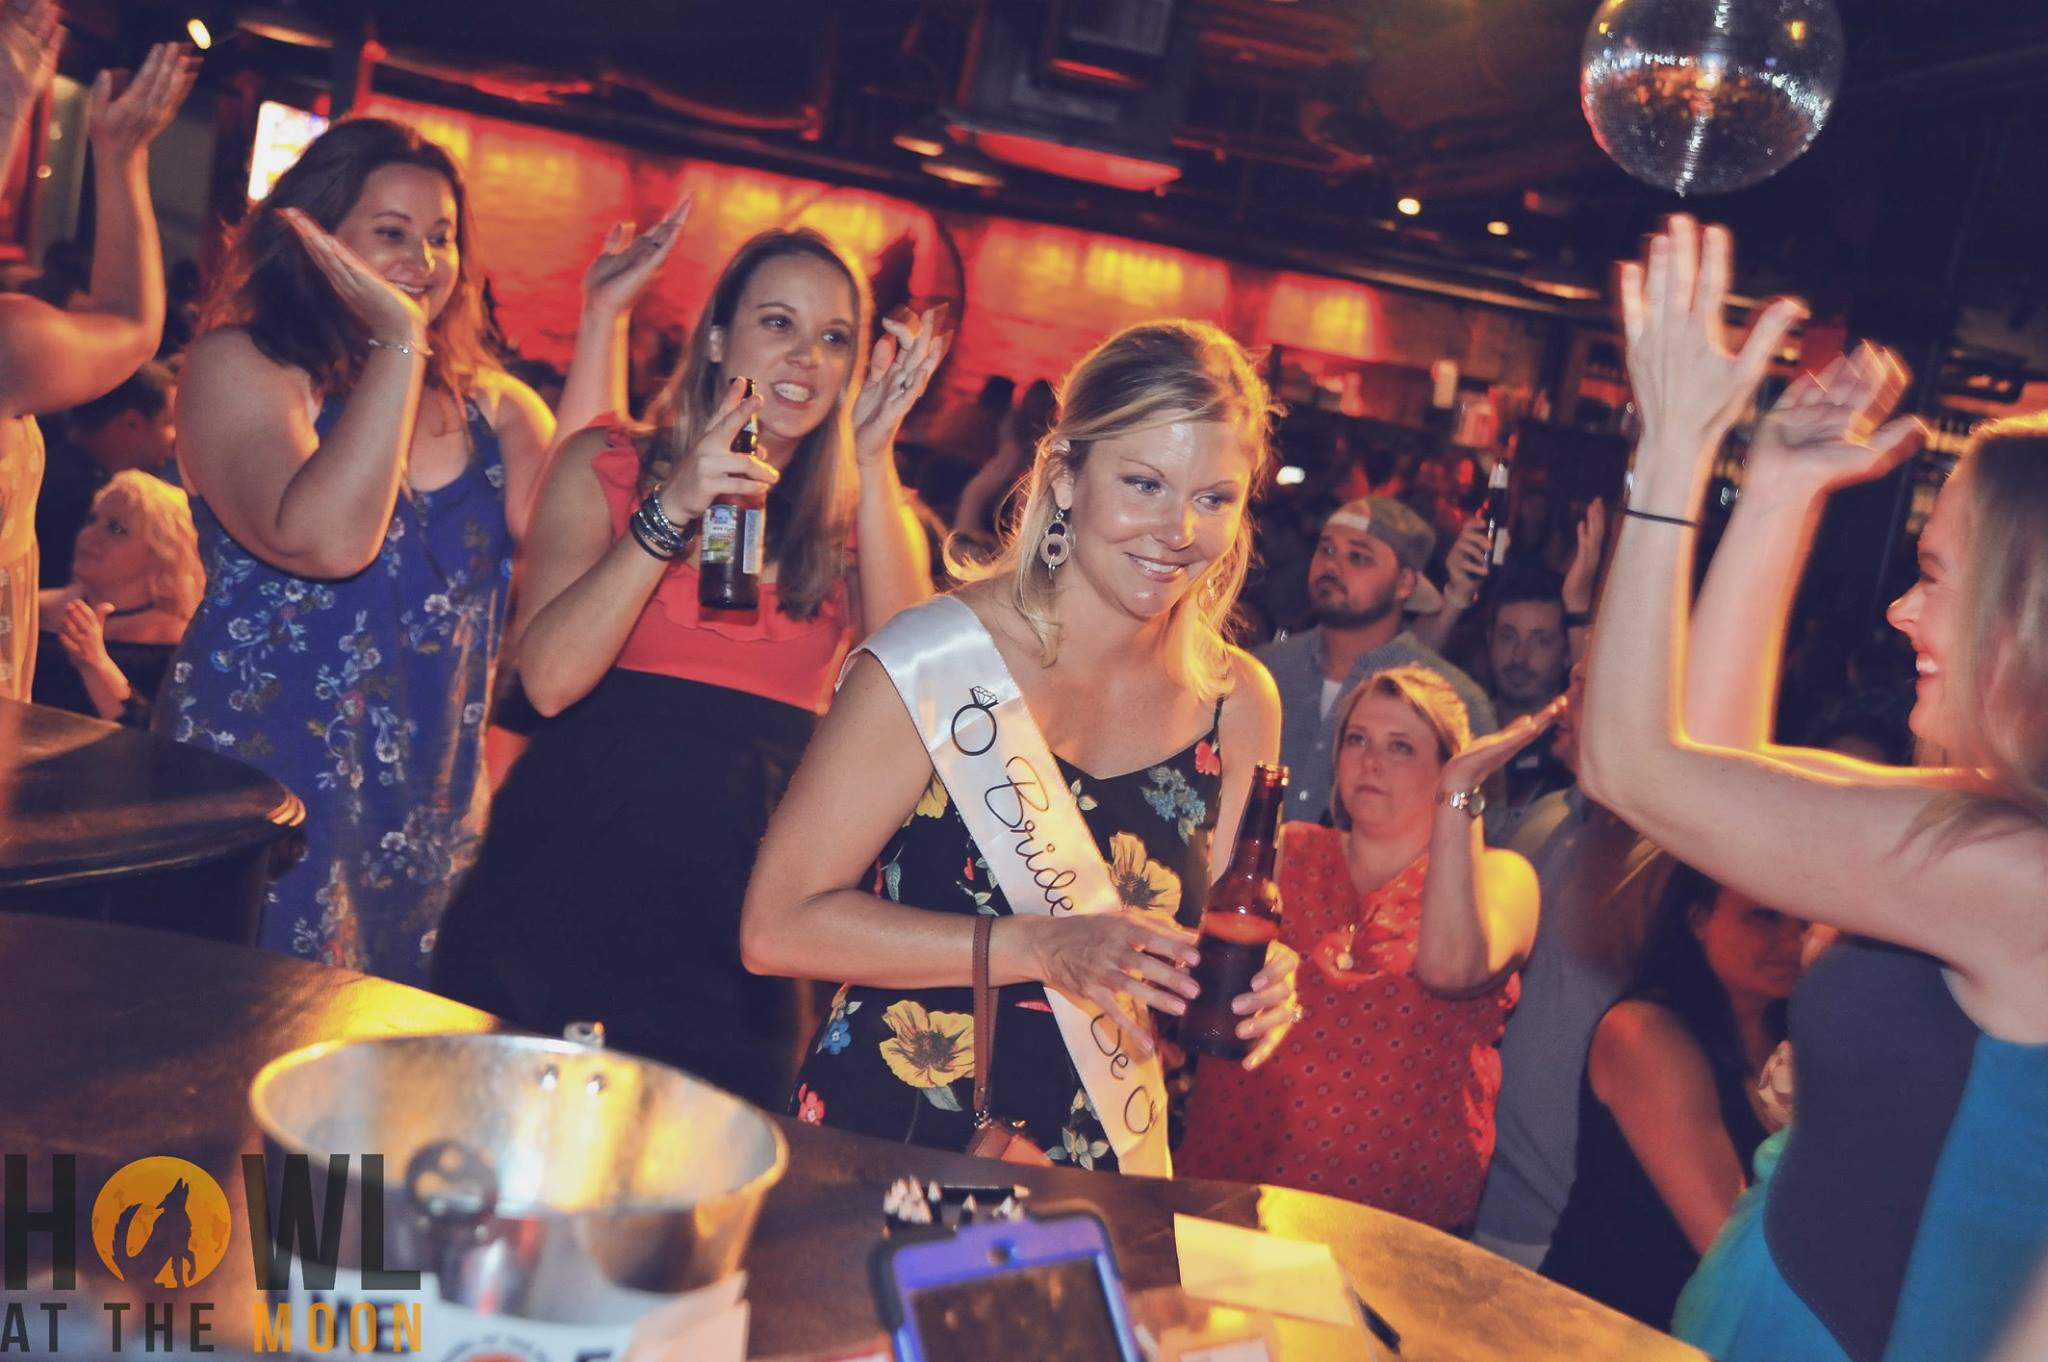 Kansas City Bachelorette Party Ideas
 Beginners Guide to Planning a Bachelorette Party